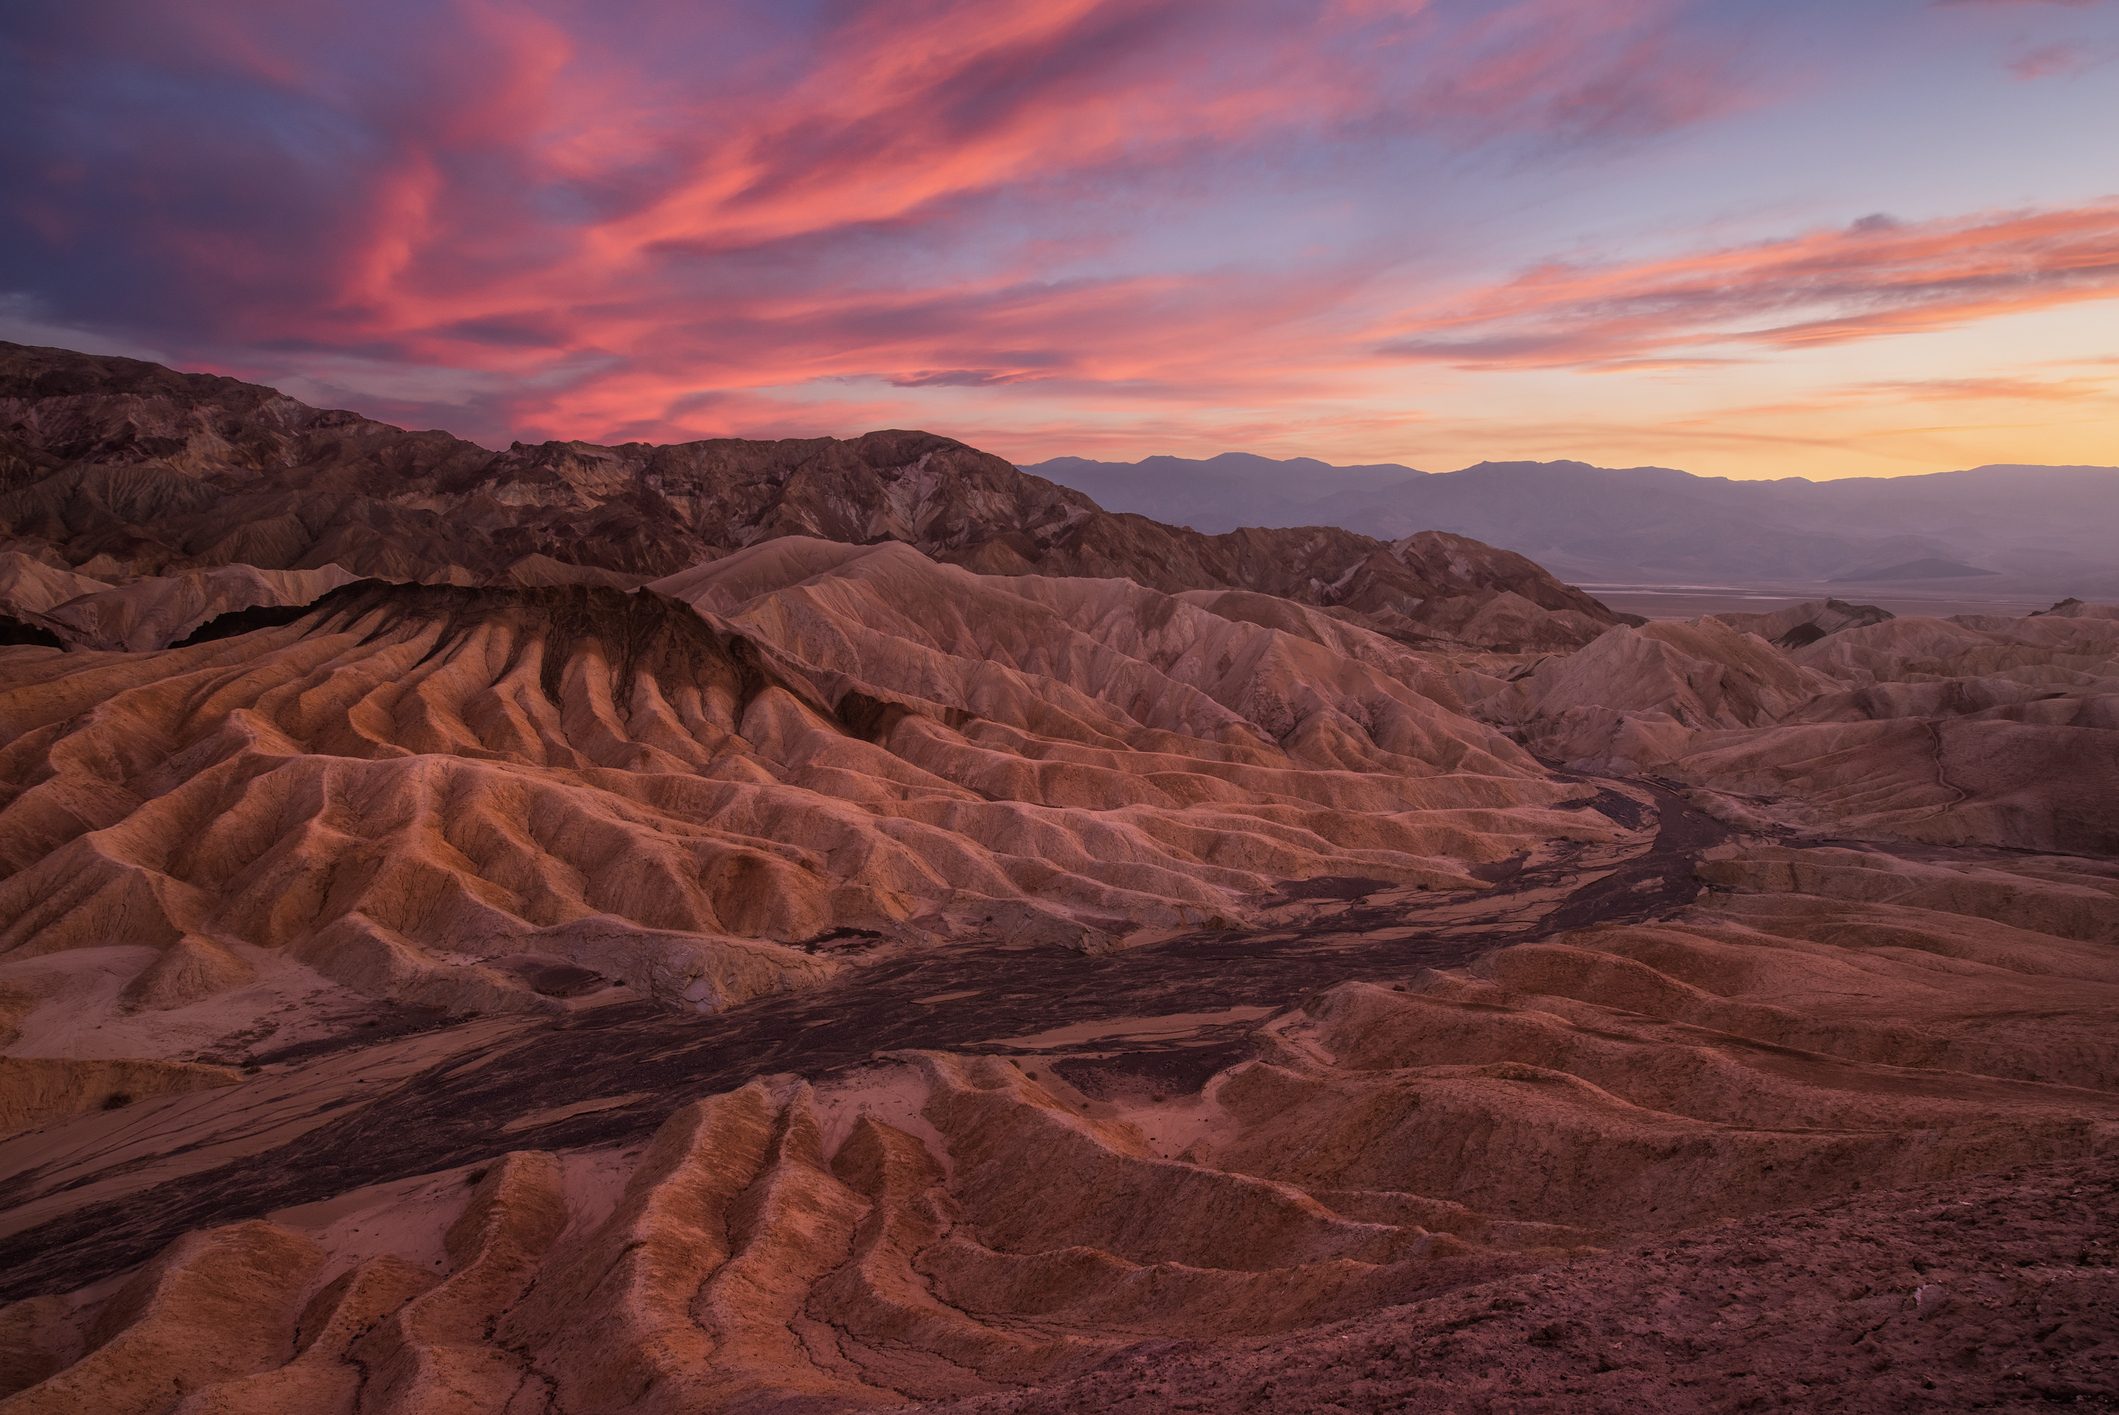 Desert Landscapes That Look Like Paintings | Reader's Digest